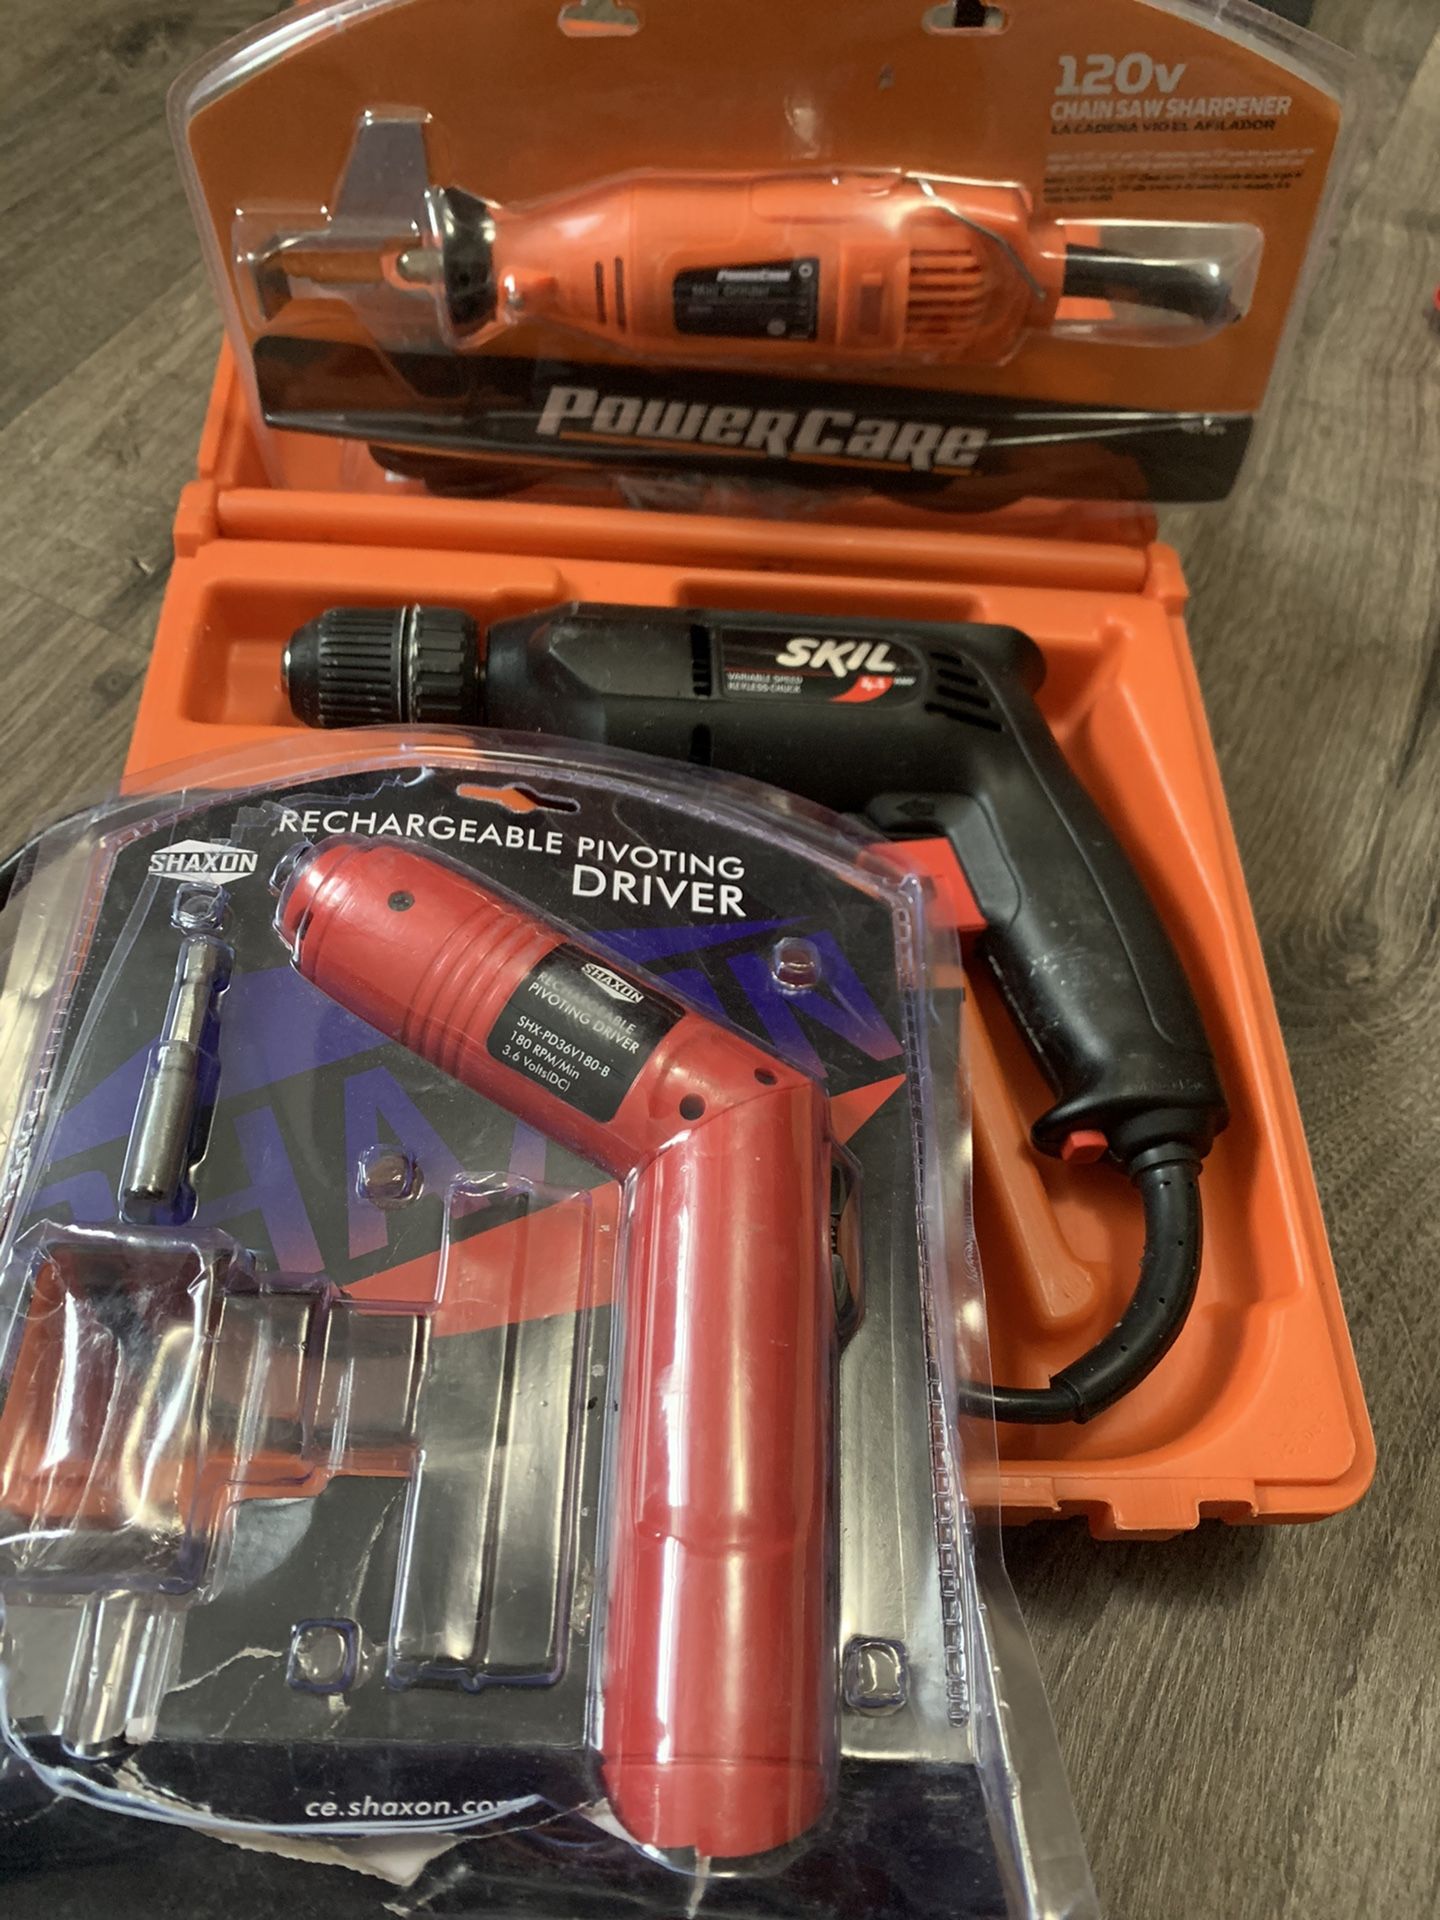 Set of corded drill, chain sharpener, and rechargeable driver.